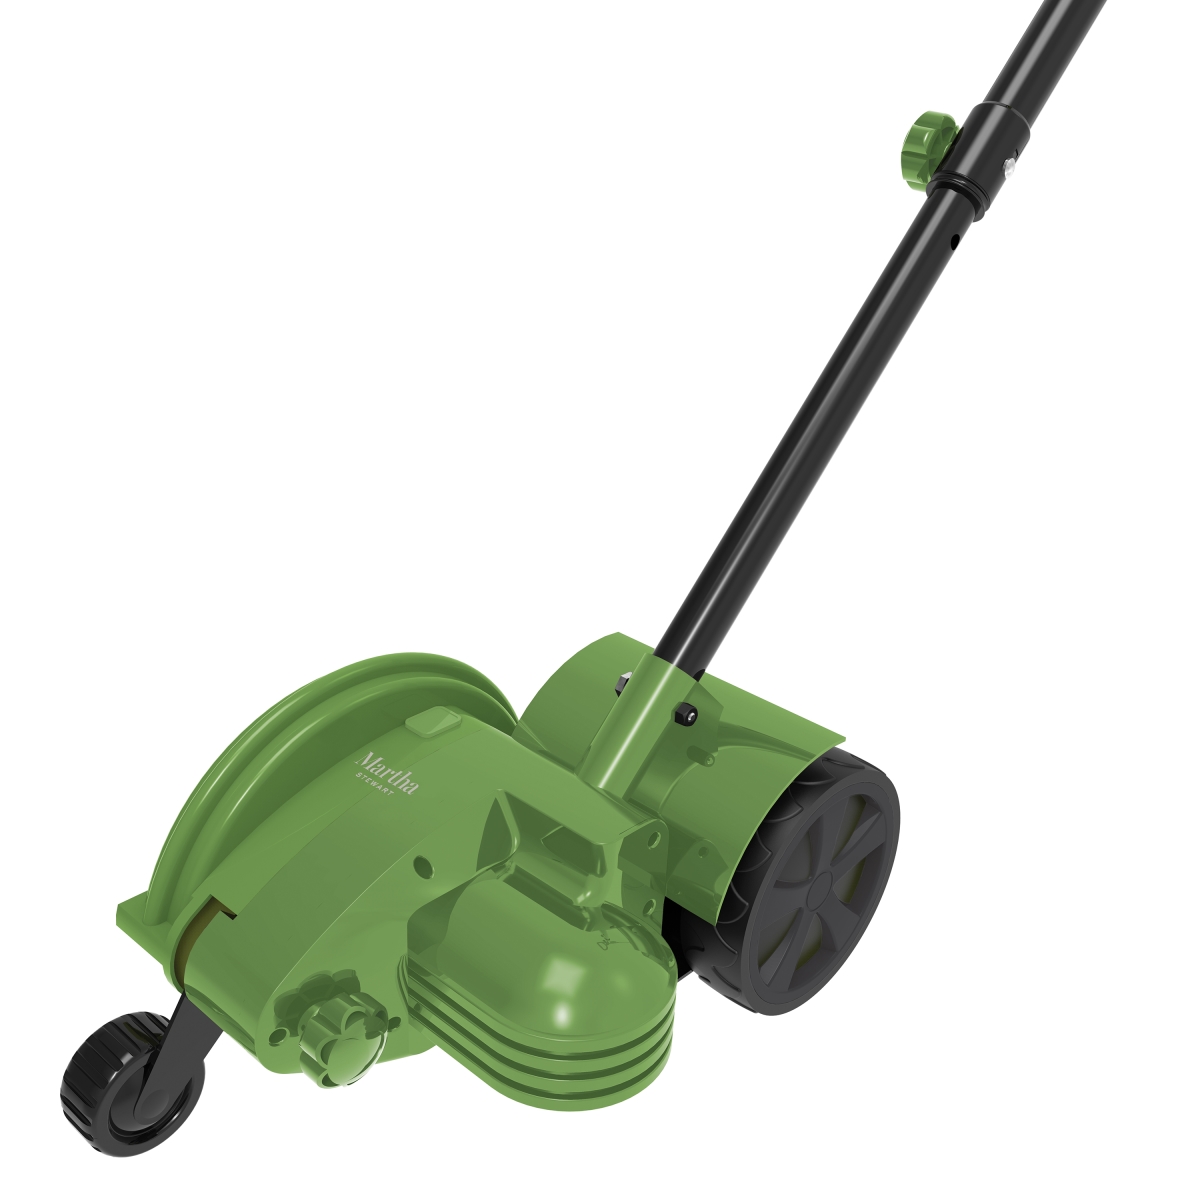 Mts-edg1 Electric 2-in-1 Edger & Trencher